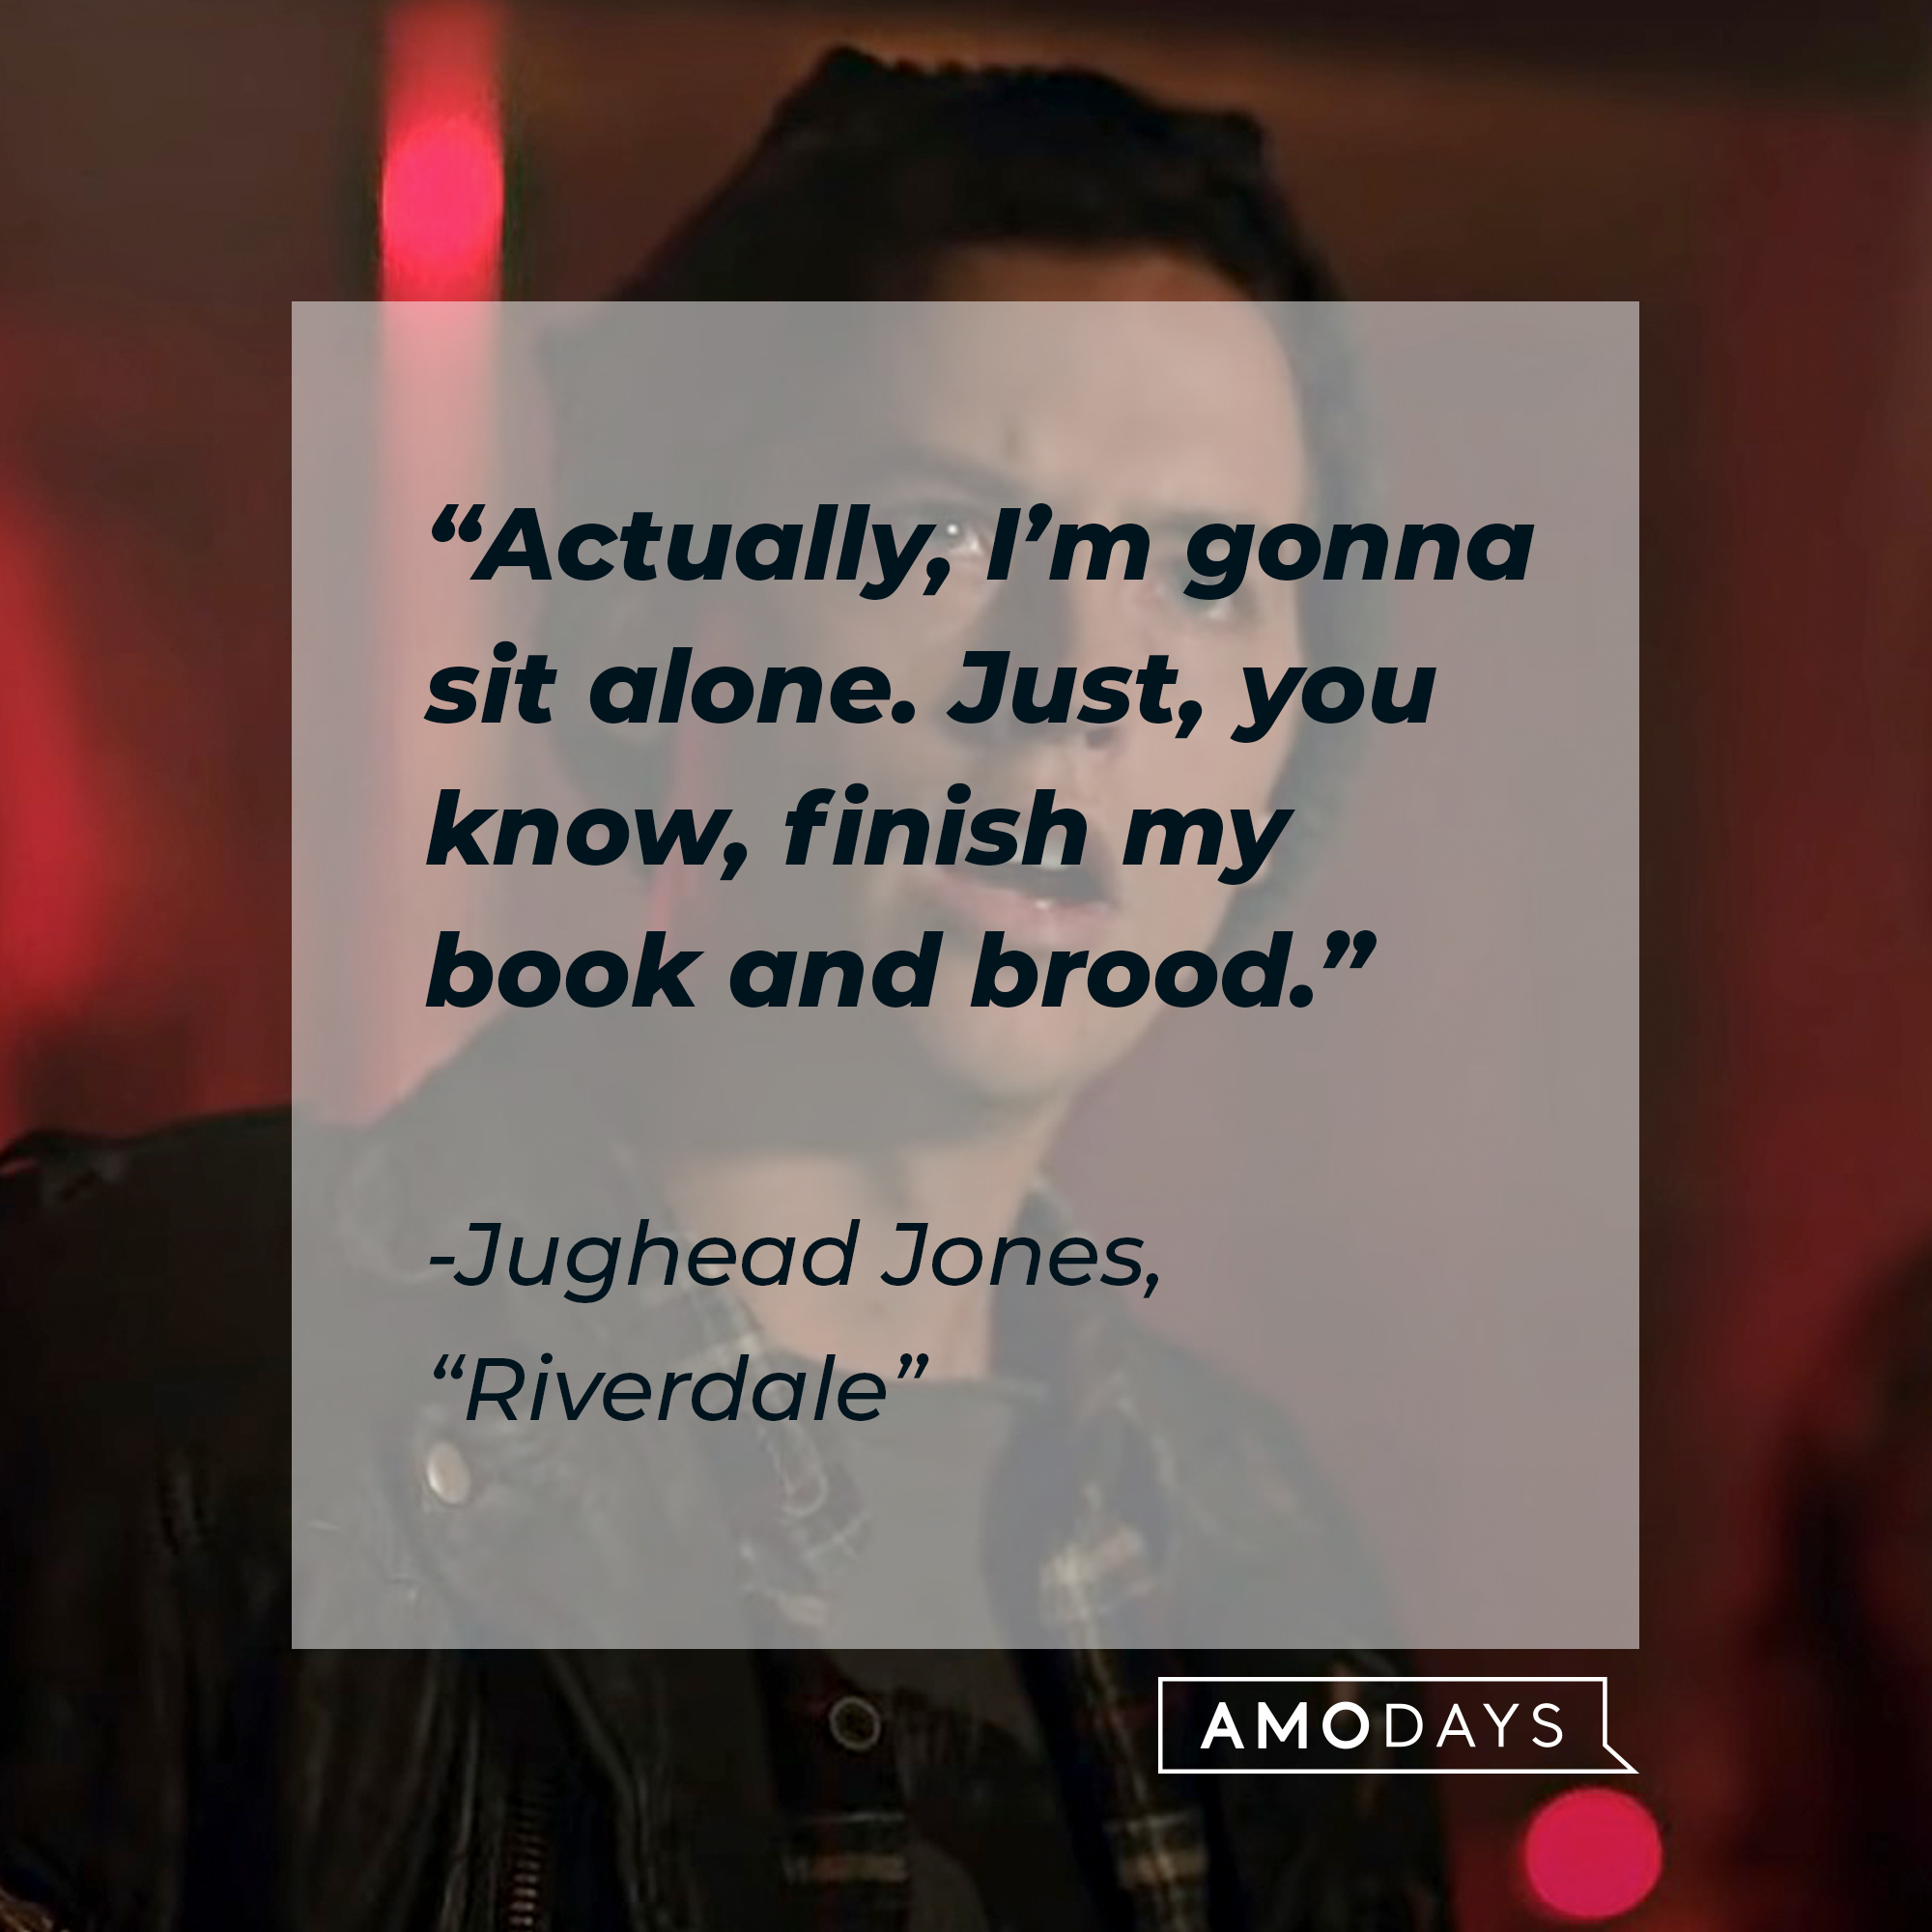 Image of Cole Sprouse as Judhead Jones in "Riverdale" with the quote: “Actually, I’m gonna sit alone. Just, you know, finish my book and brood.” | Source: facebook.com/Riverdale